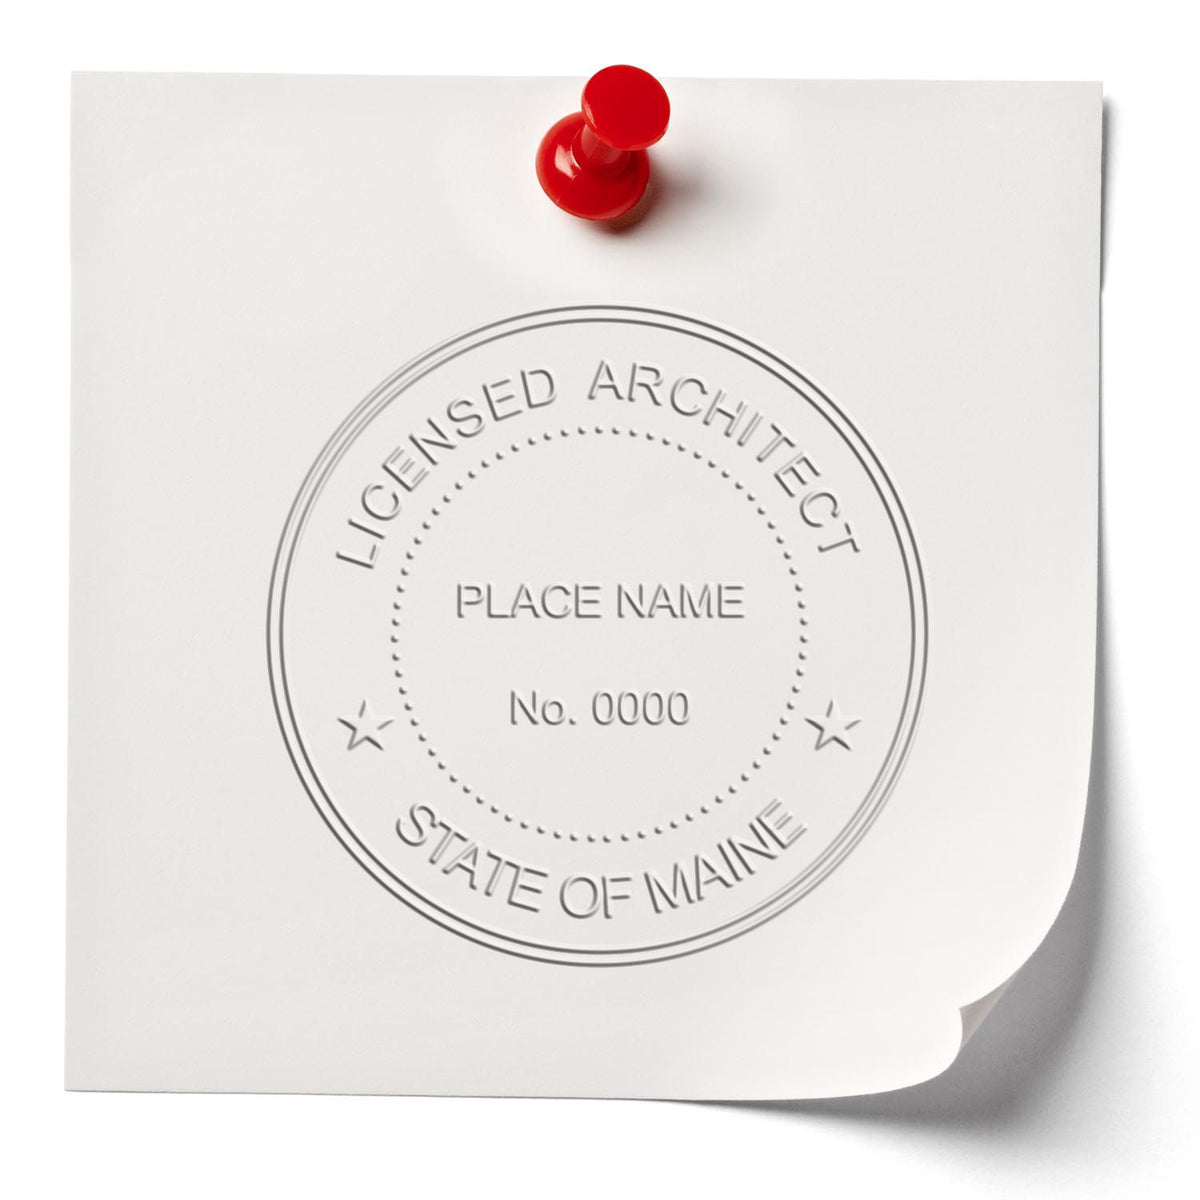 A stamped impression of the Maine Desk Architect Embossing Seal in this stylish lifestyle photo, setting the tone for a unique and personalized product.